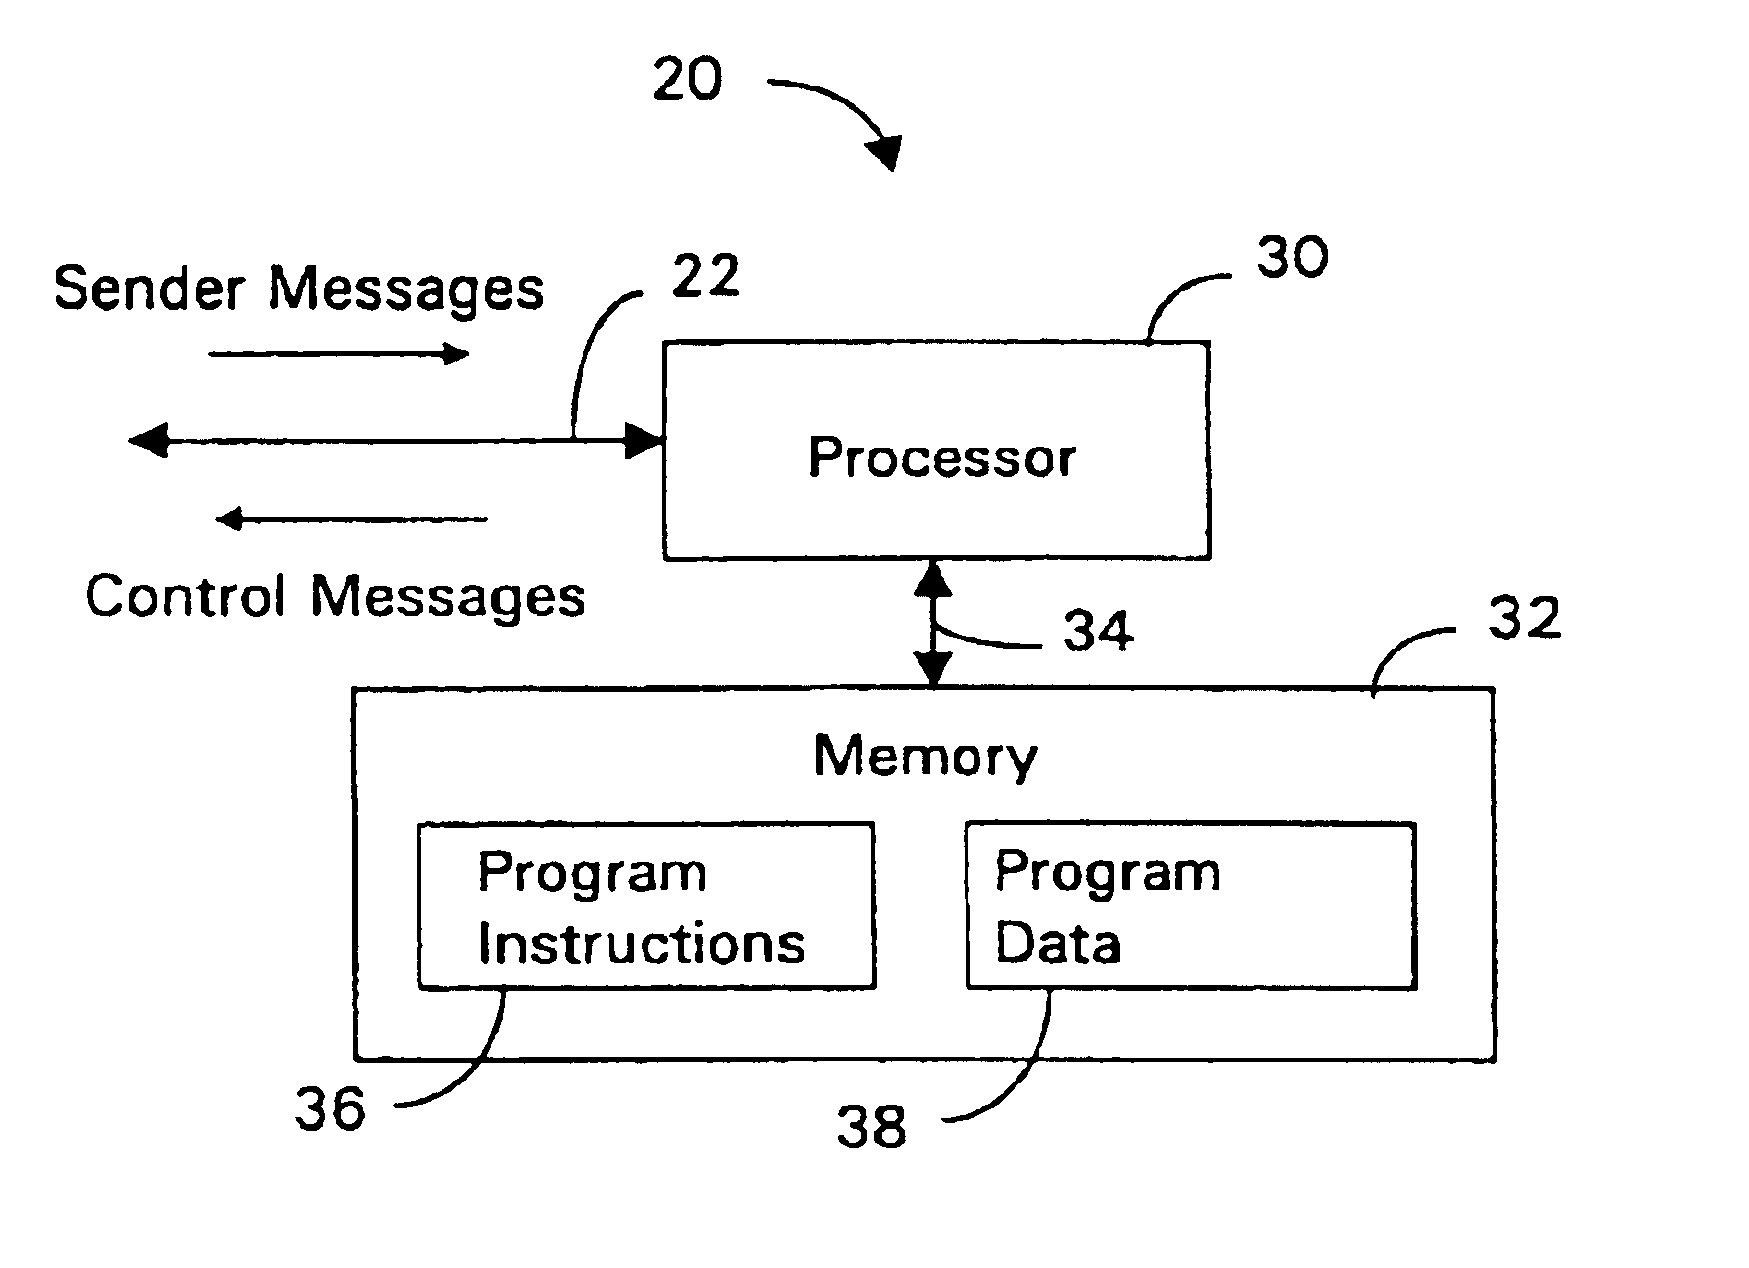 Admission control for aggregate data flows based on a threshold adjusted according to the frequency of traffic congestion notification